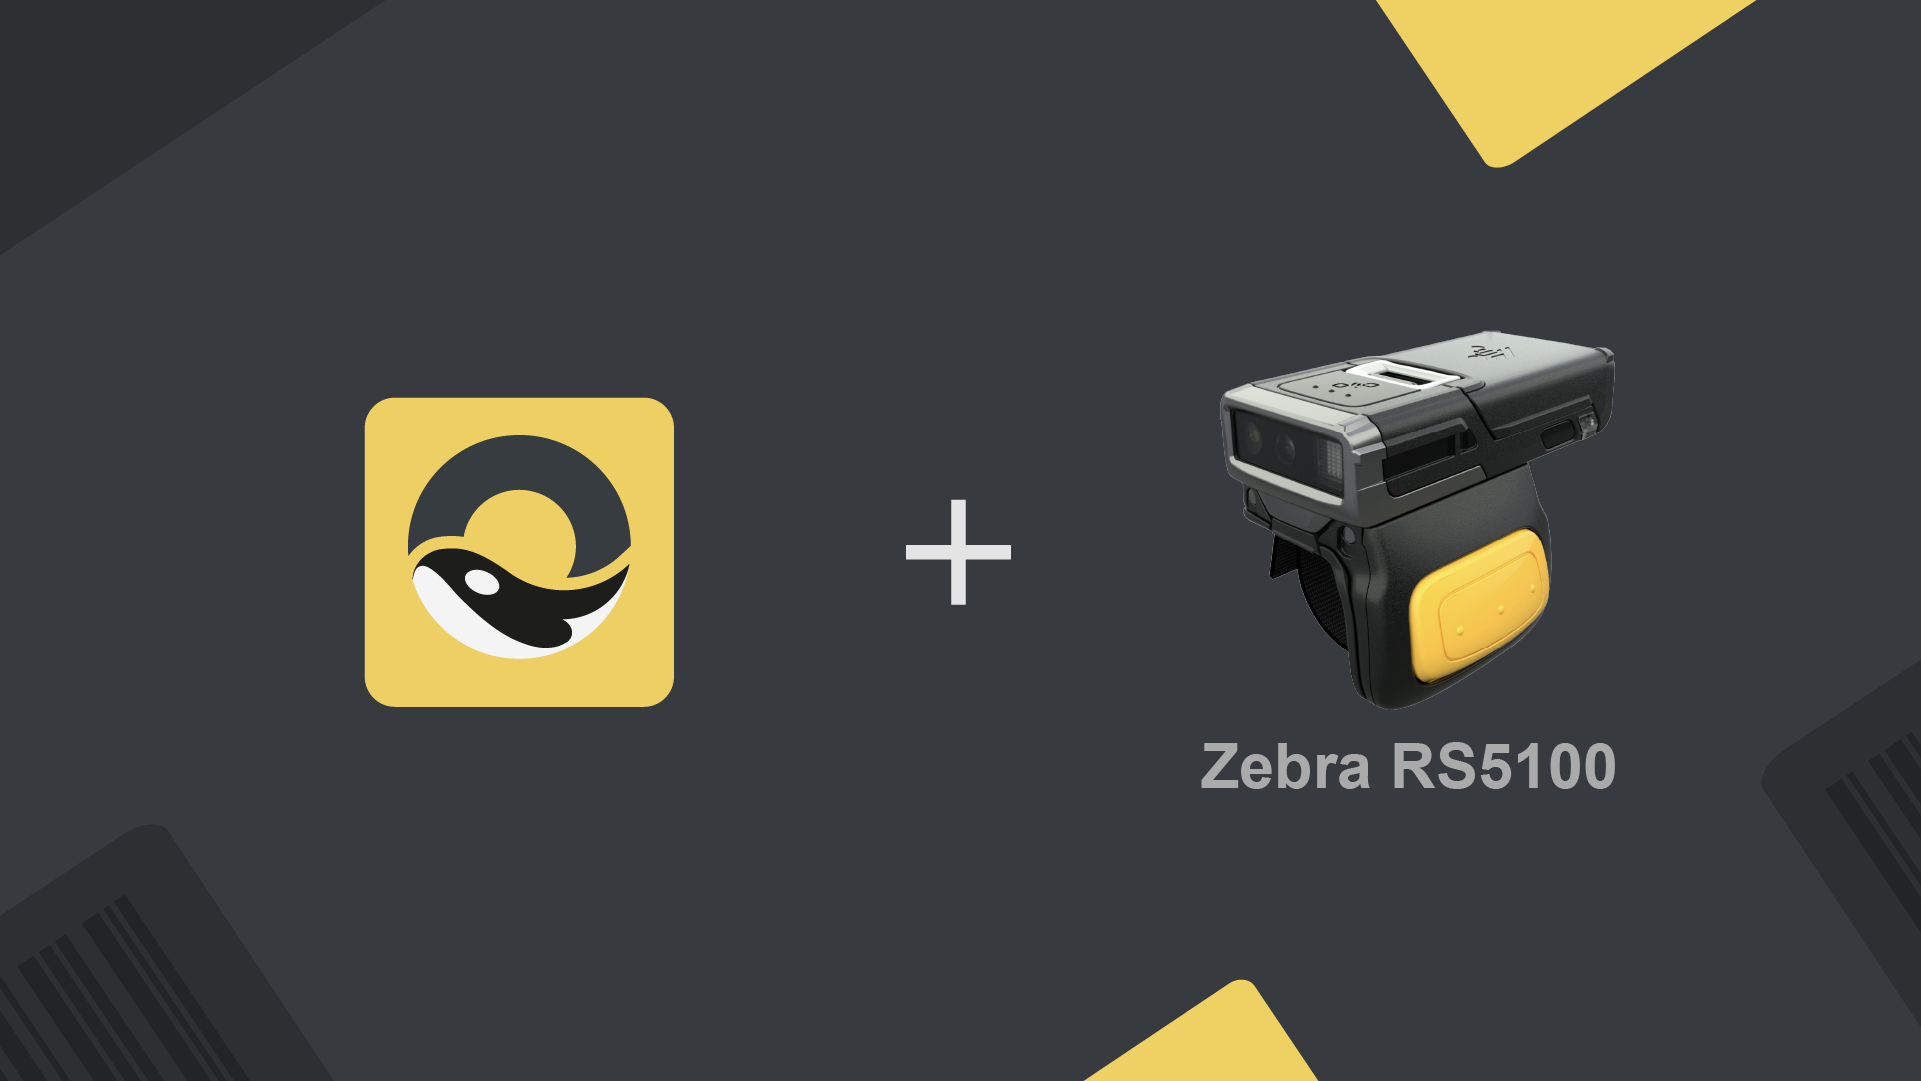 Using the Zebra RS5100 with Orca Scan